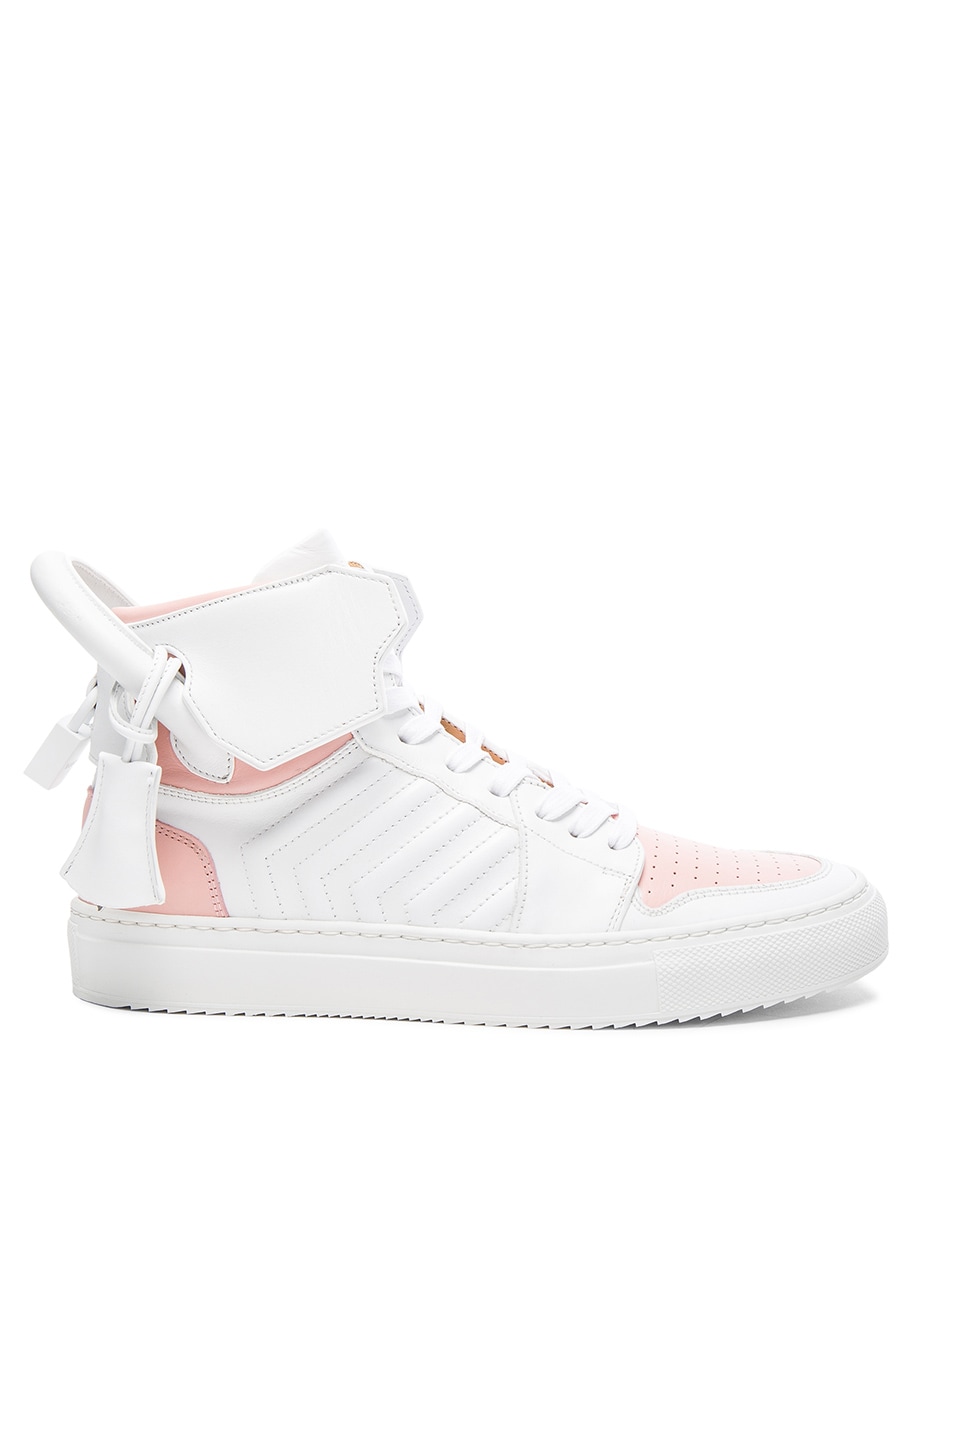 Image 1 of Buscemi 110MM Leather Sneakers in White & Rose